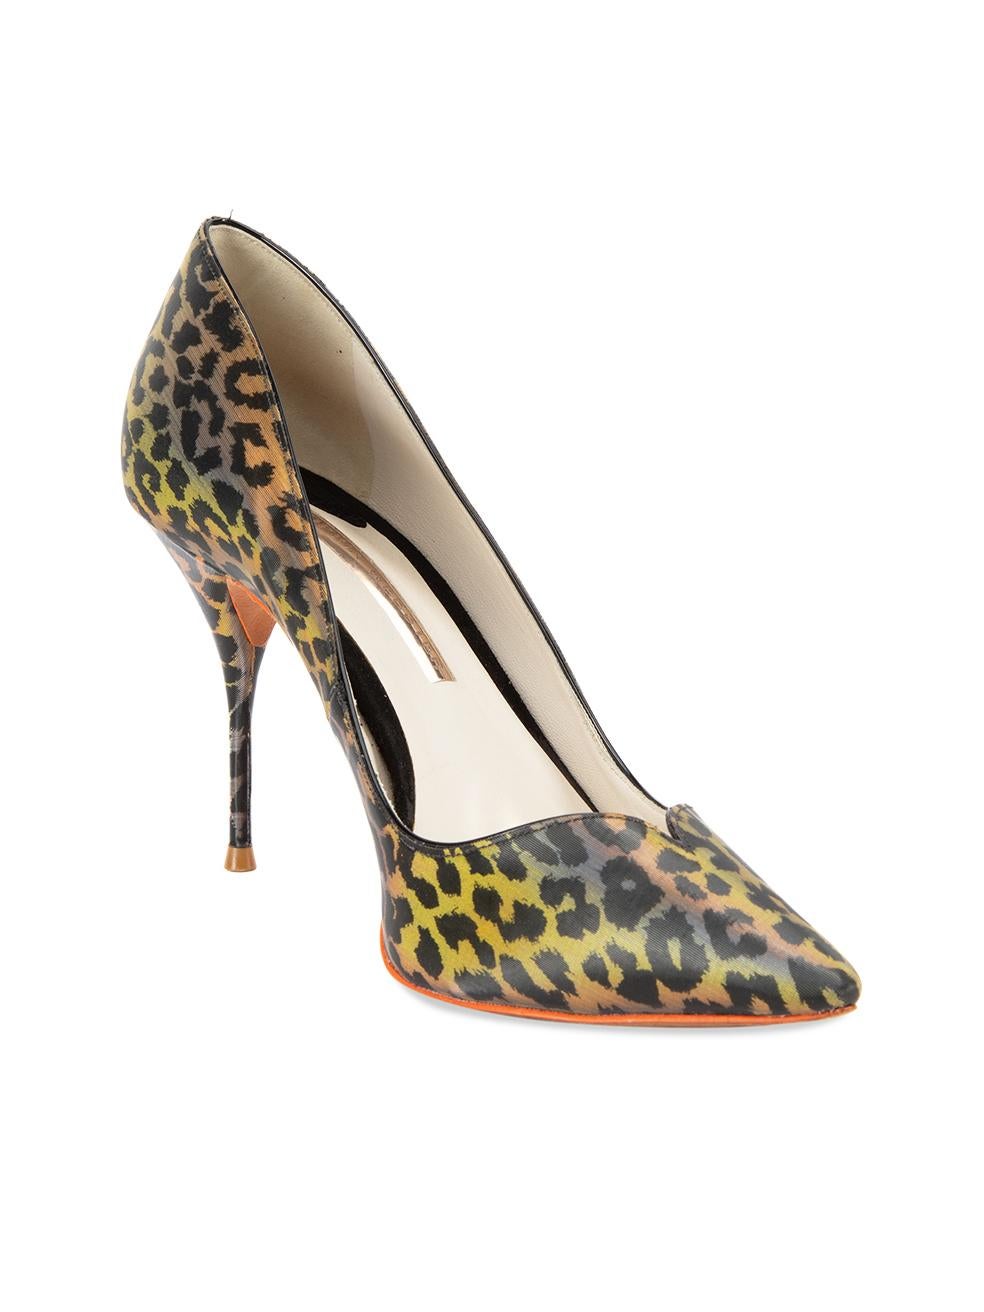 CONDITION is Very good. Minimal wear to heels is evident. Some loose threads and light wear to the outsoles on this used Sophia Webster designer resale item.  Details  Iridescent Leopard print PVC High heel Point toe    Made in Brazil    Composition